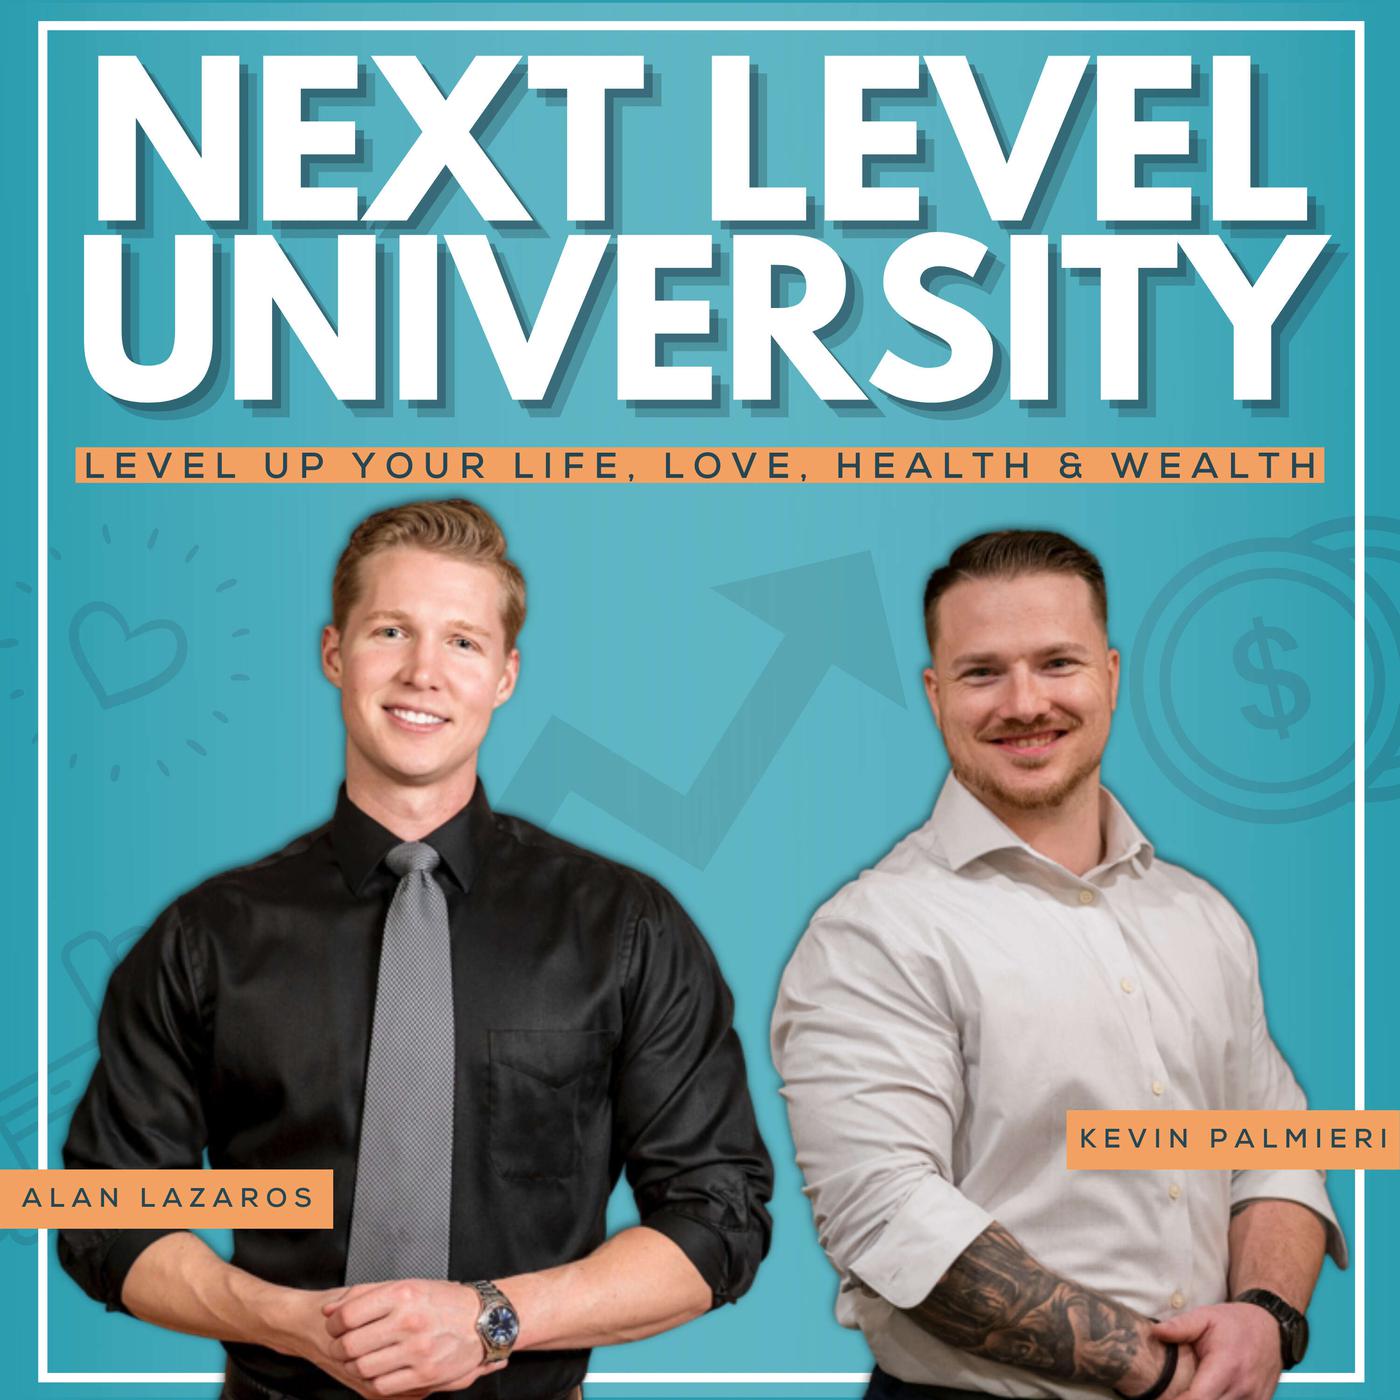 OFFICE HOURS |  Private Coaching Session with Alan Lazaros and Kevin Palmieri, Hosts of Next Level University Podcast